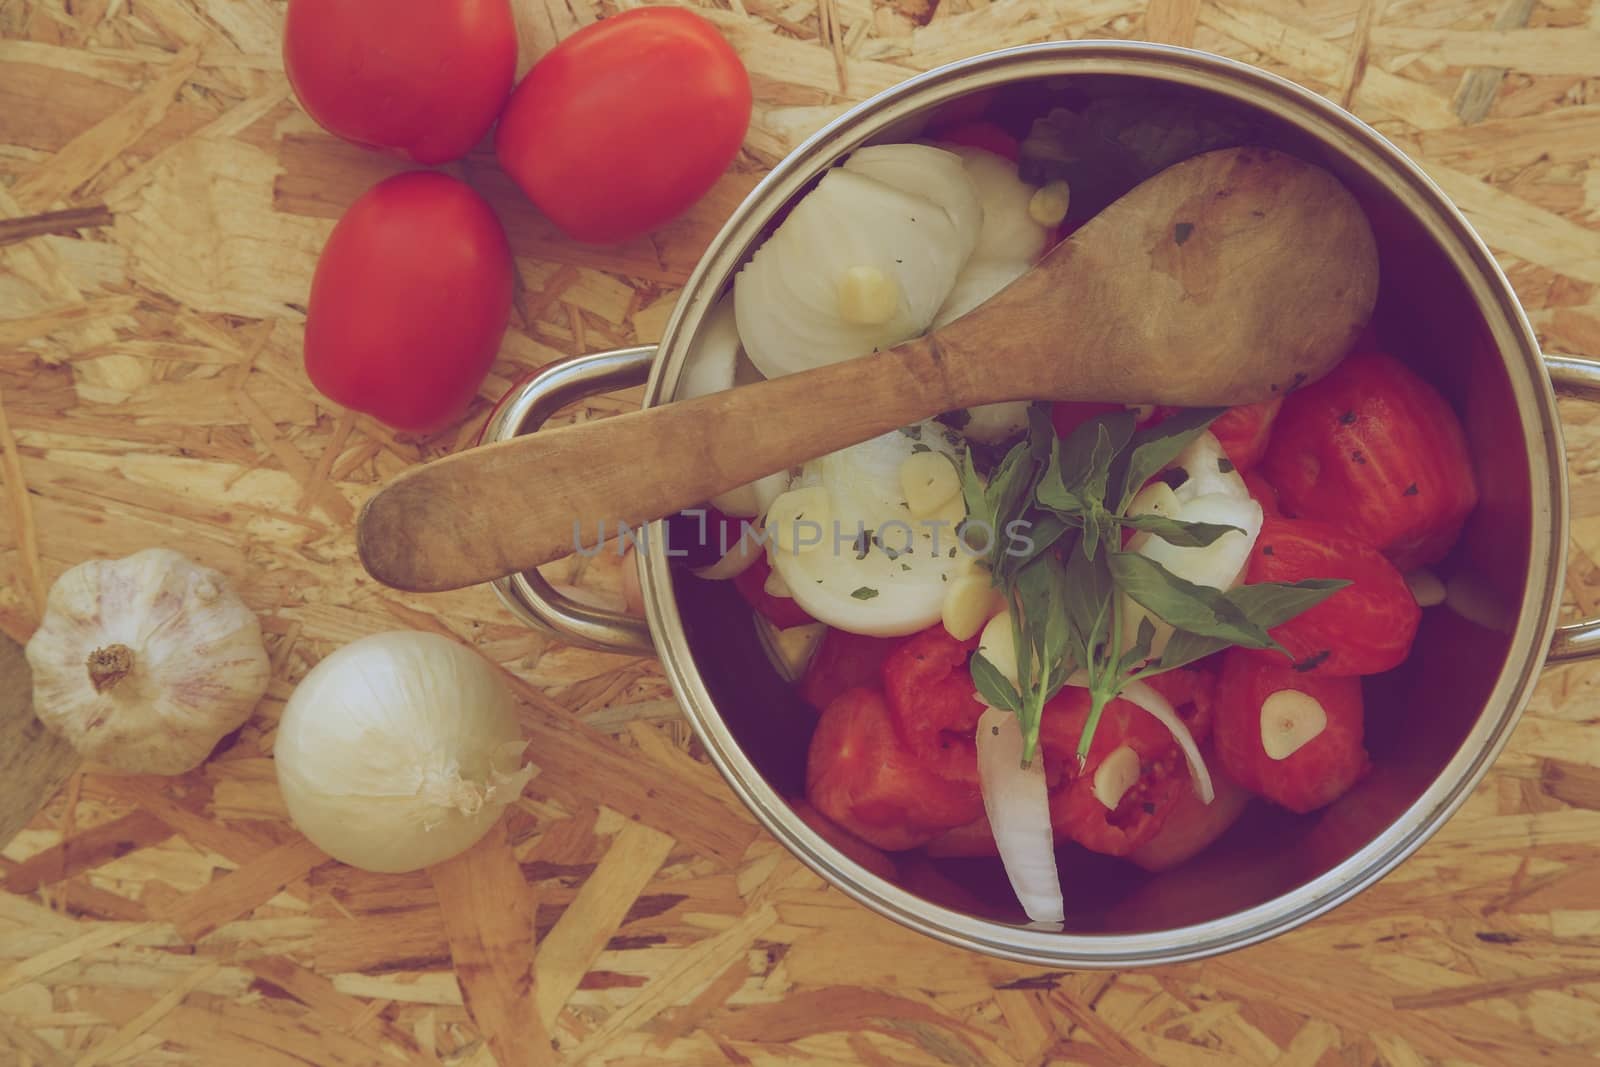 Prepared food ingredients for cooking Italian tomato sauce - salsa. Ingredients are placed in the pot which is on the wooden surface. Vintage photo